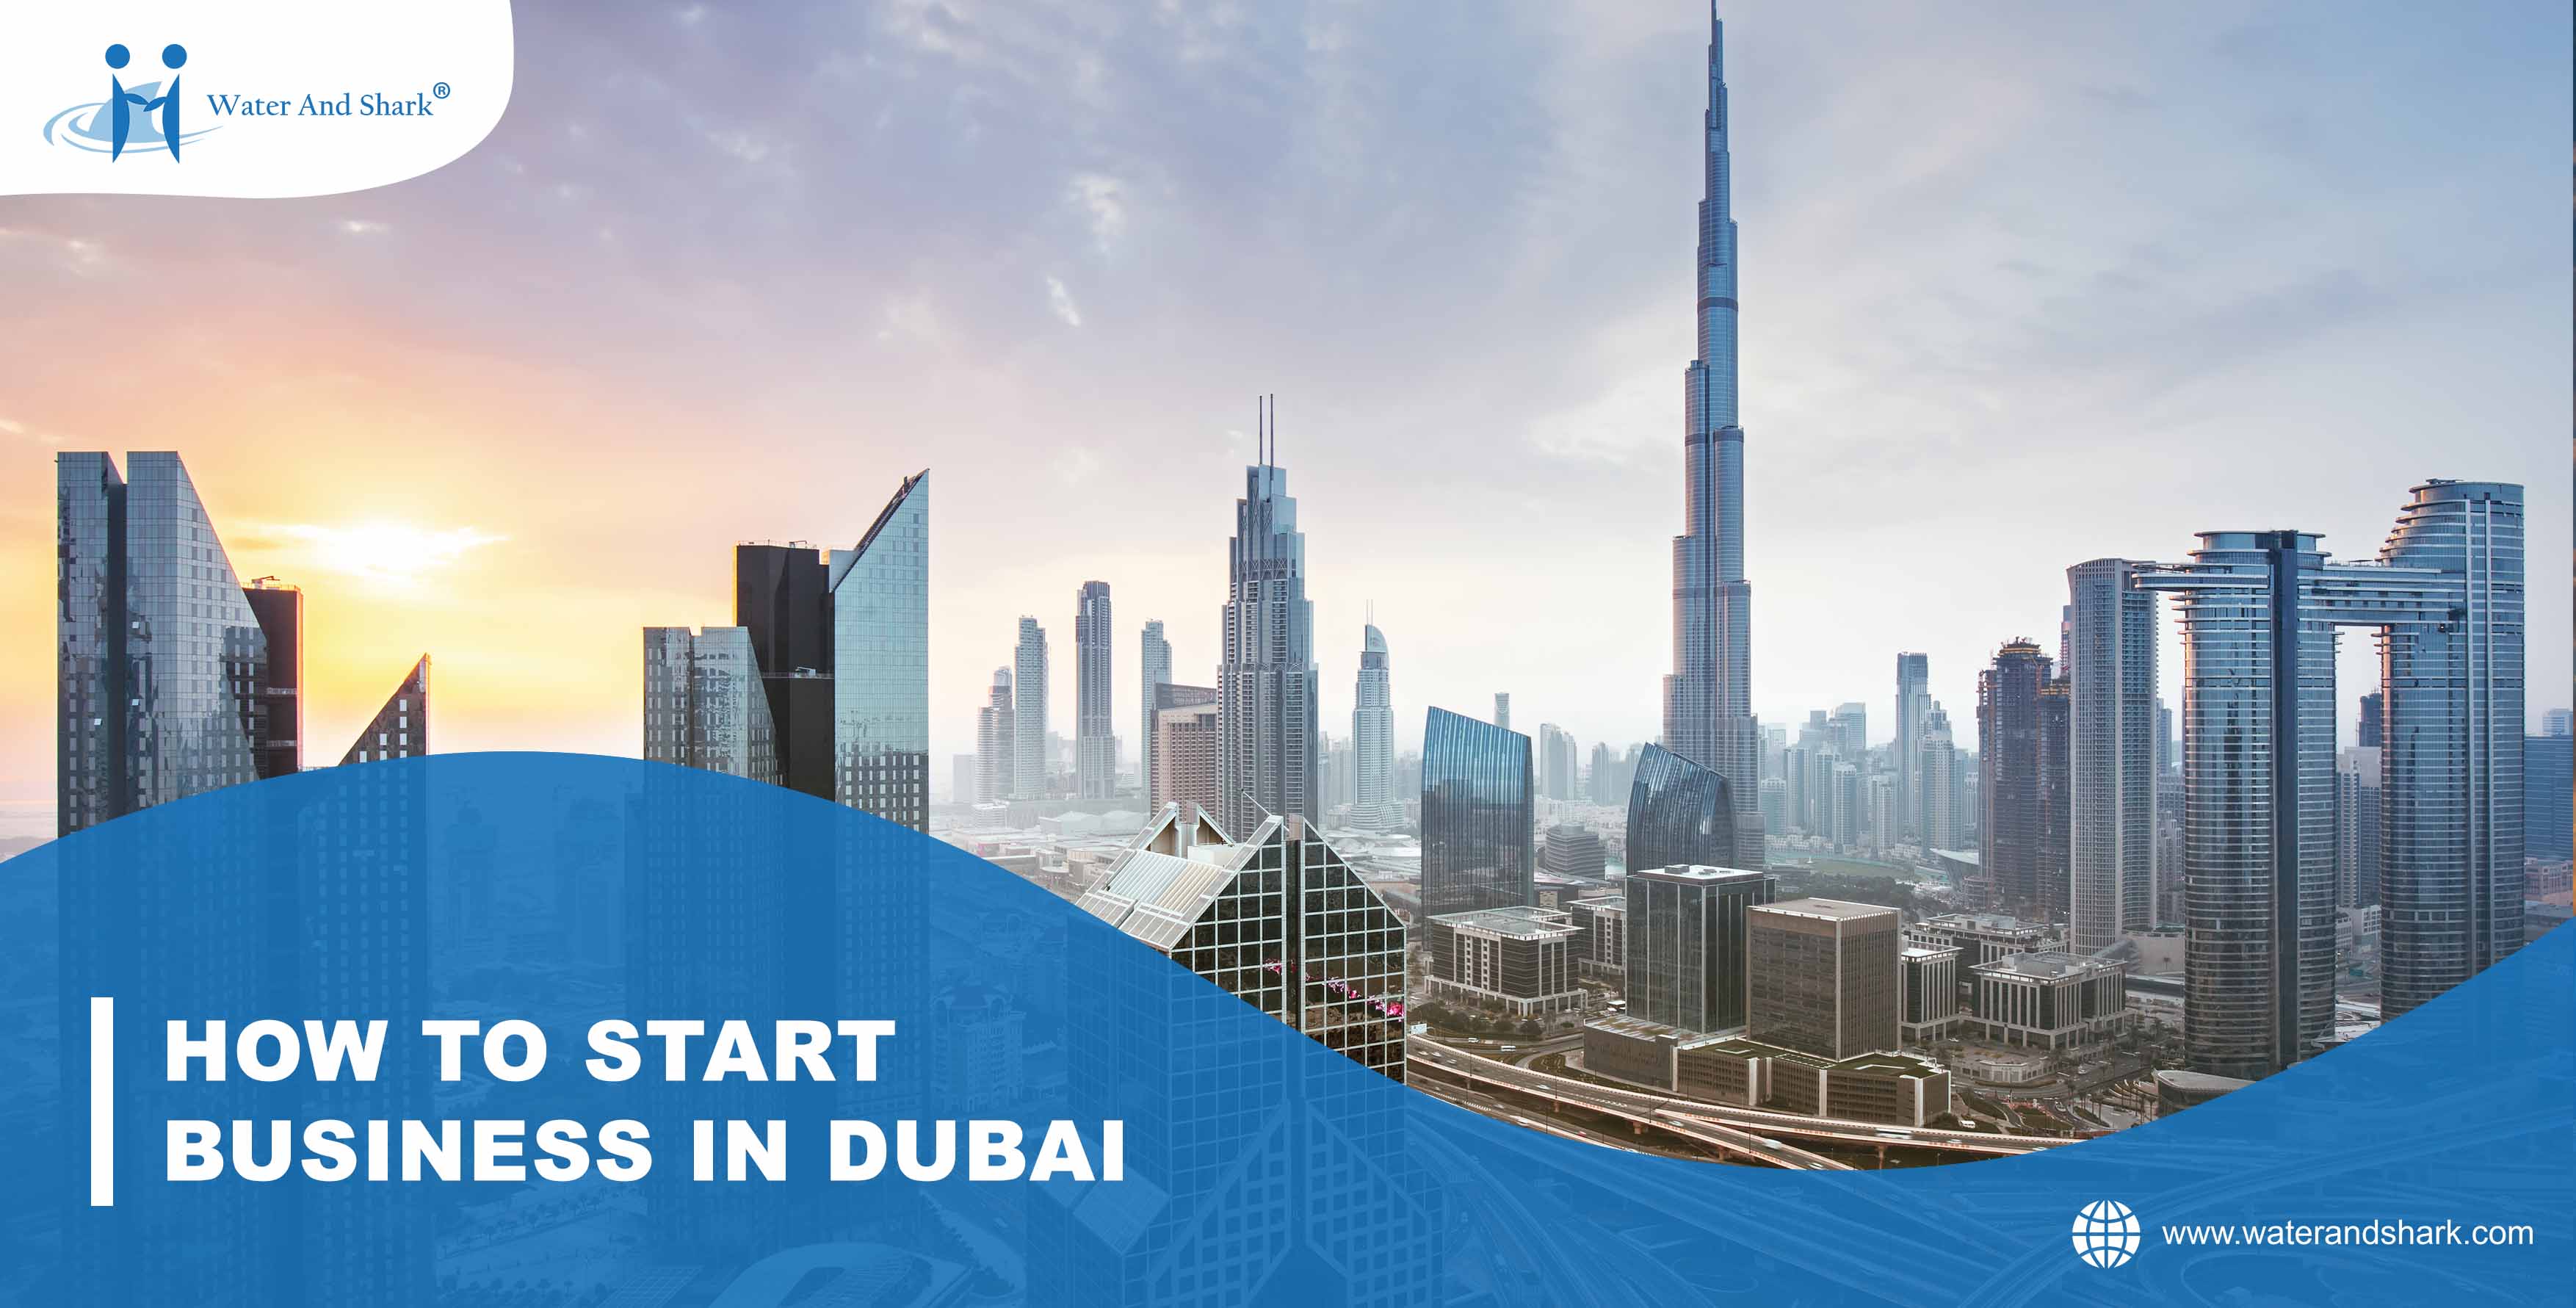 650x1280_HOW_TO_START_BUSINESS_IN_DUBAI_low_image.jpg